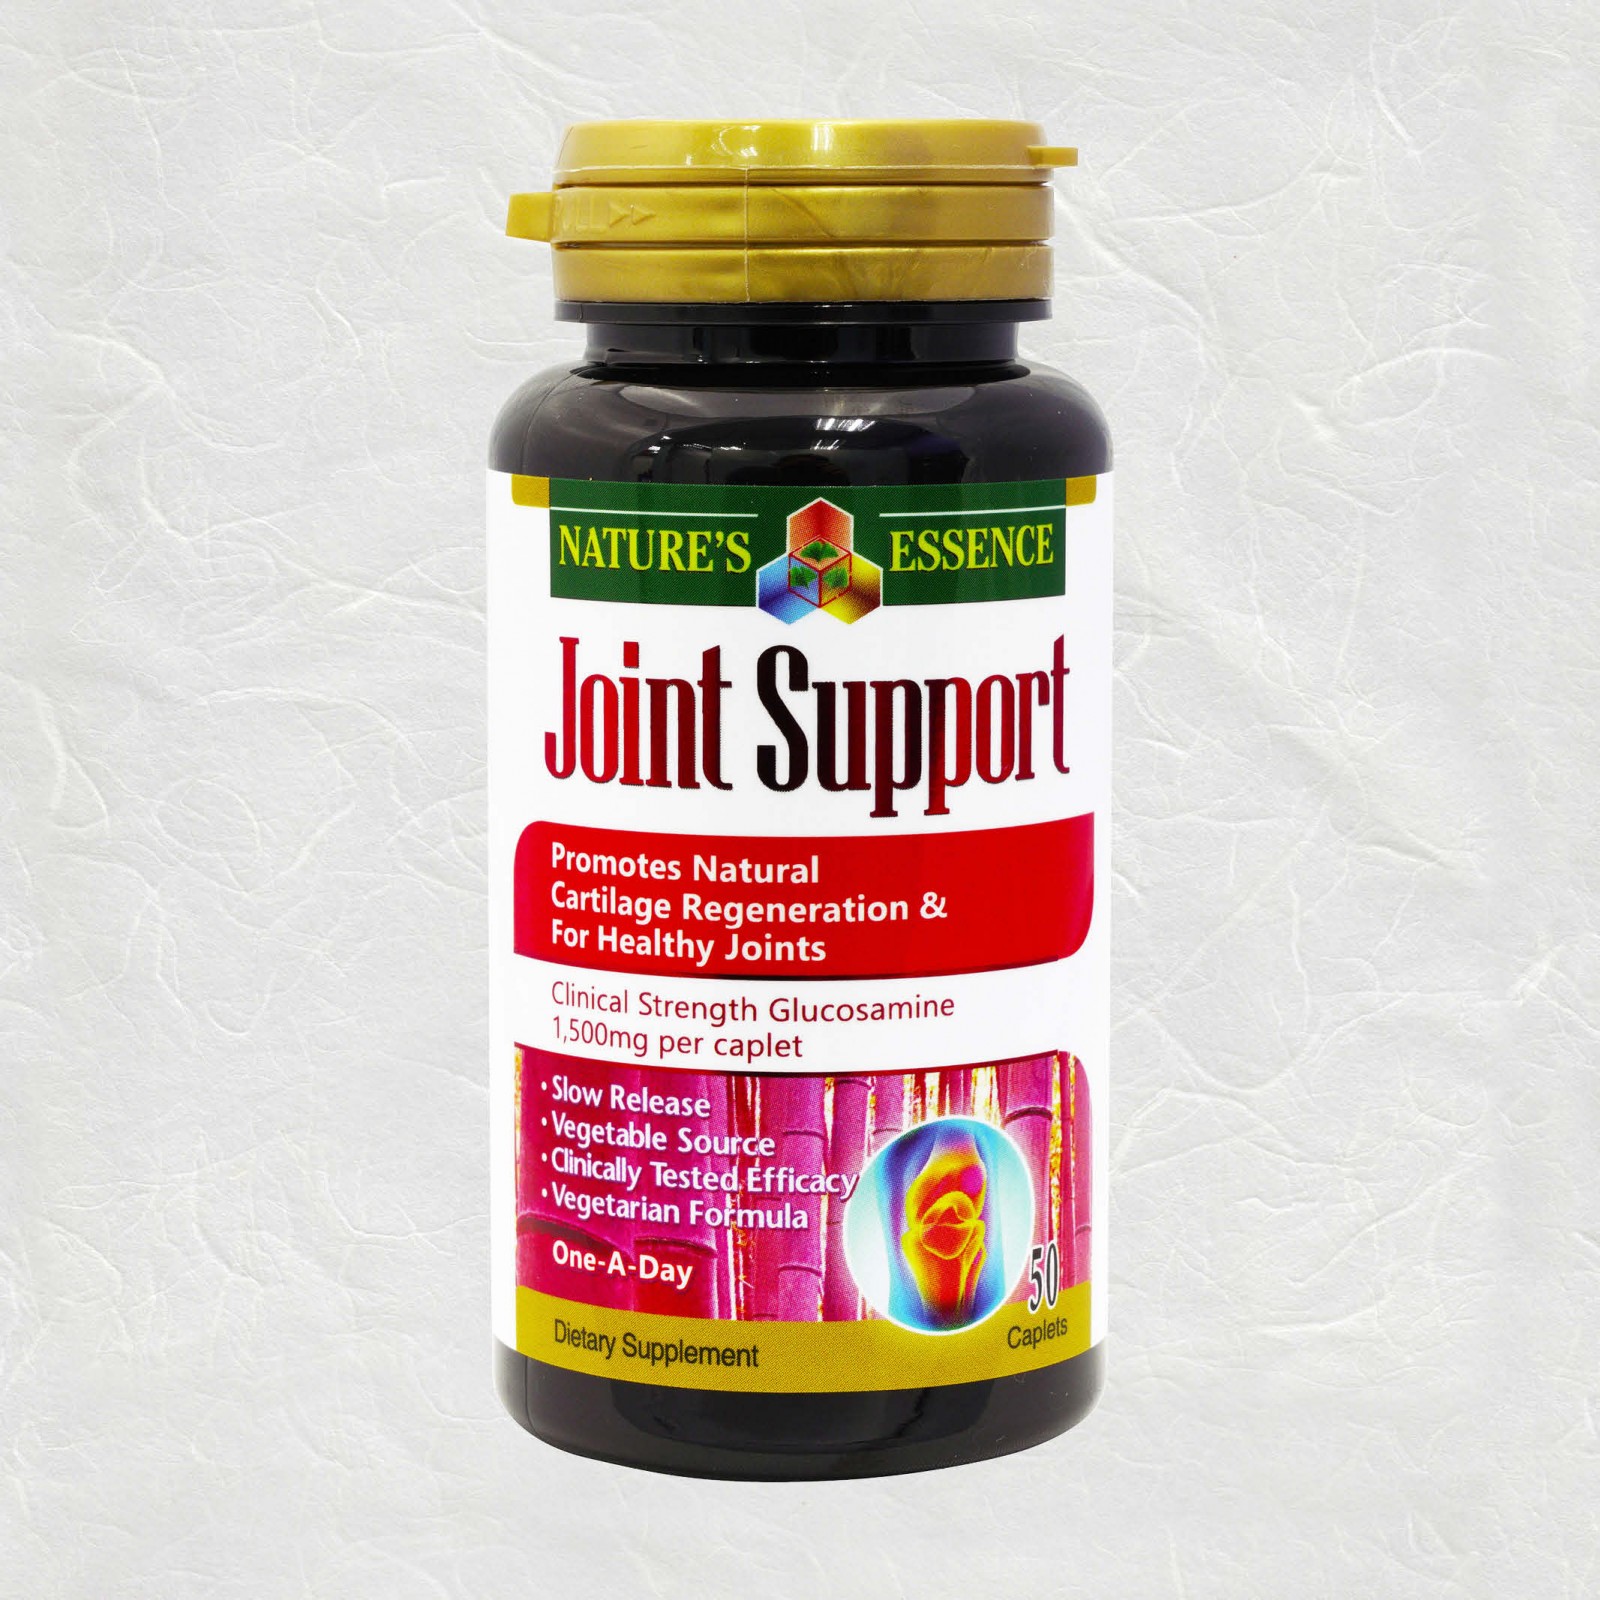 NATURE’S ESSENCE JOINT SUPPORT